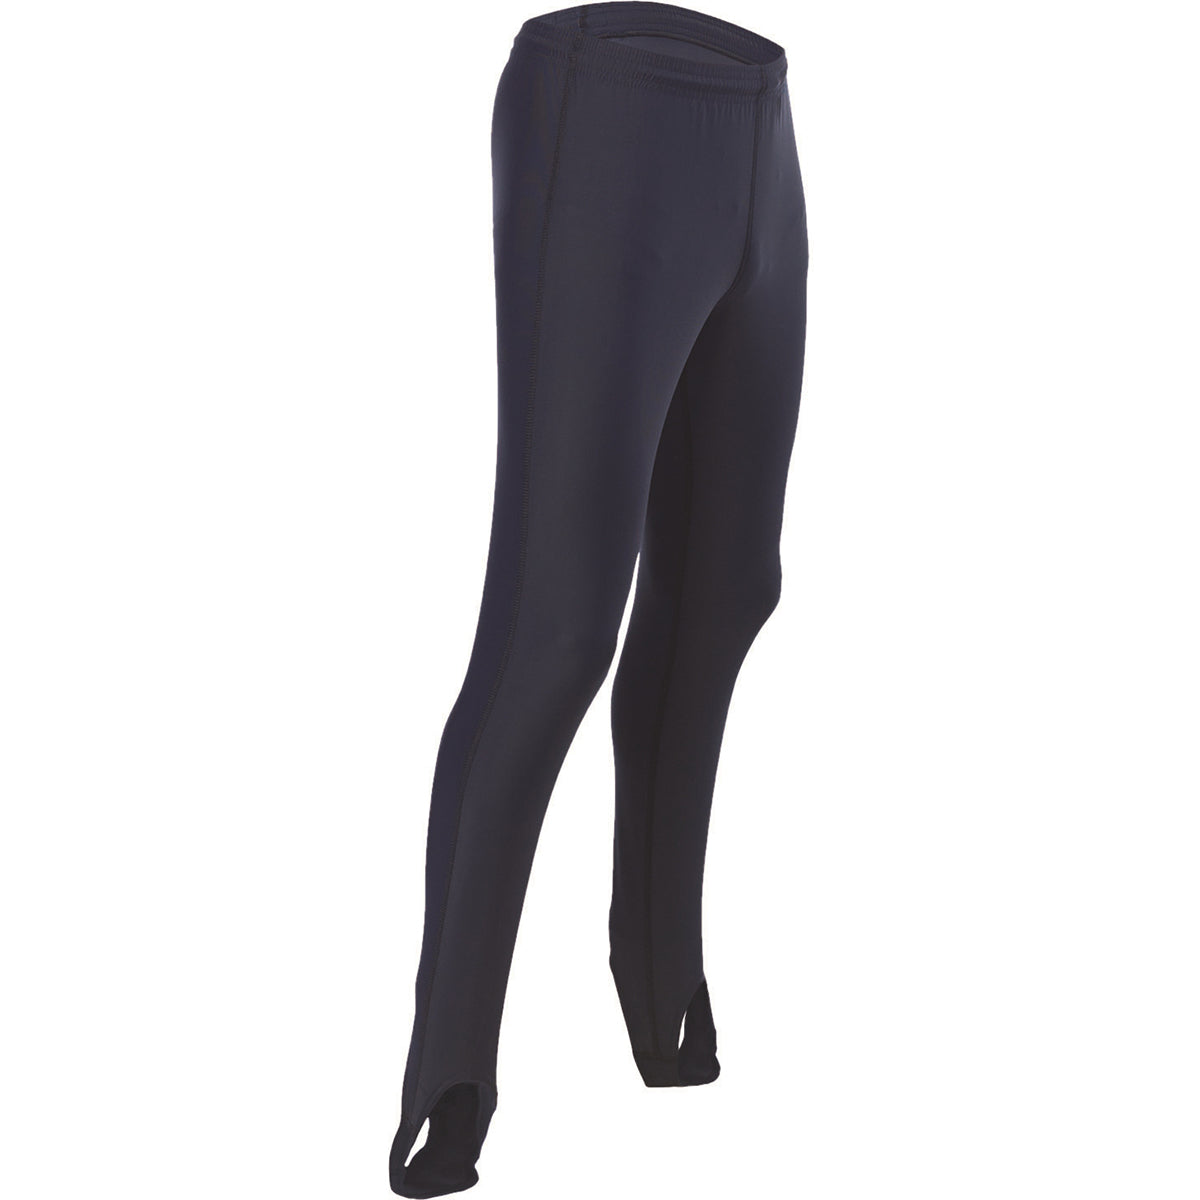 Cliff Keen The Force Compression Gear Wrestling Tights - Black Cliff Keen